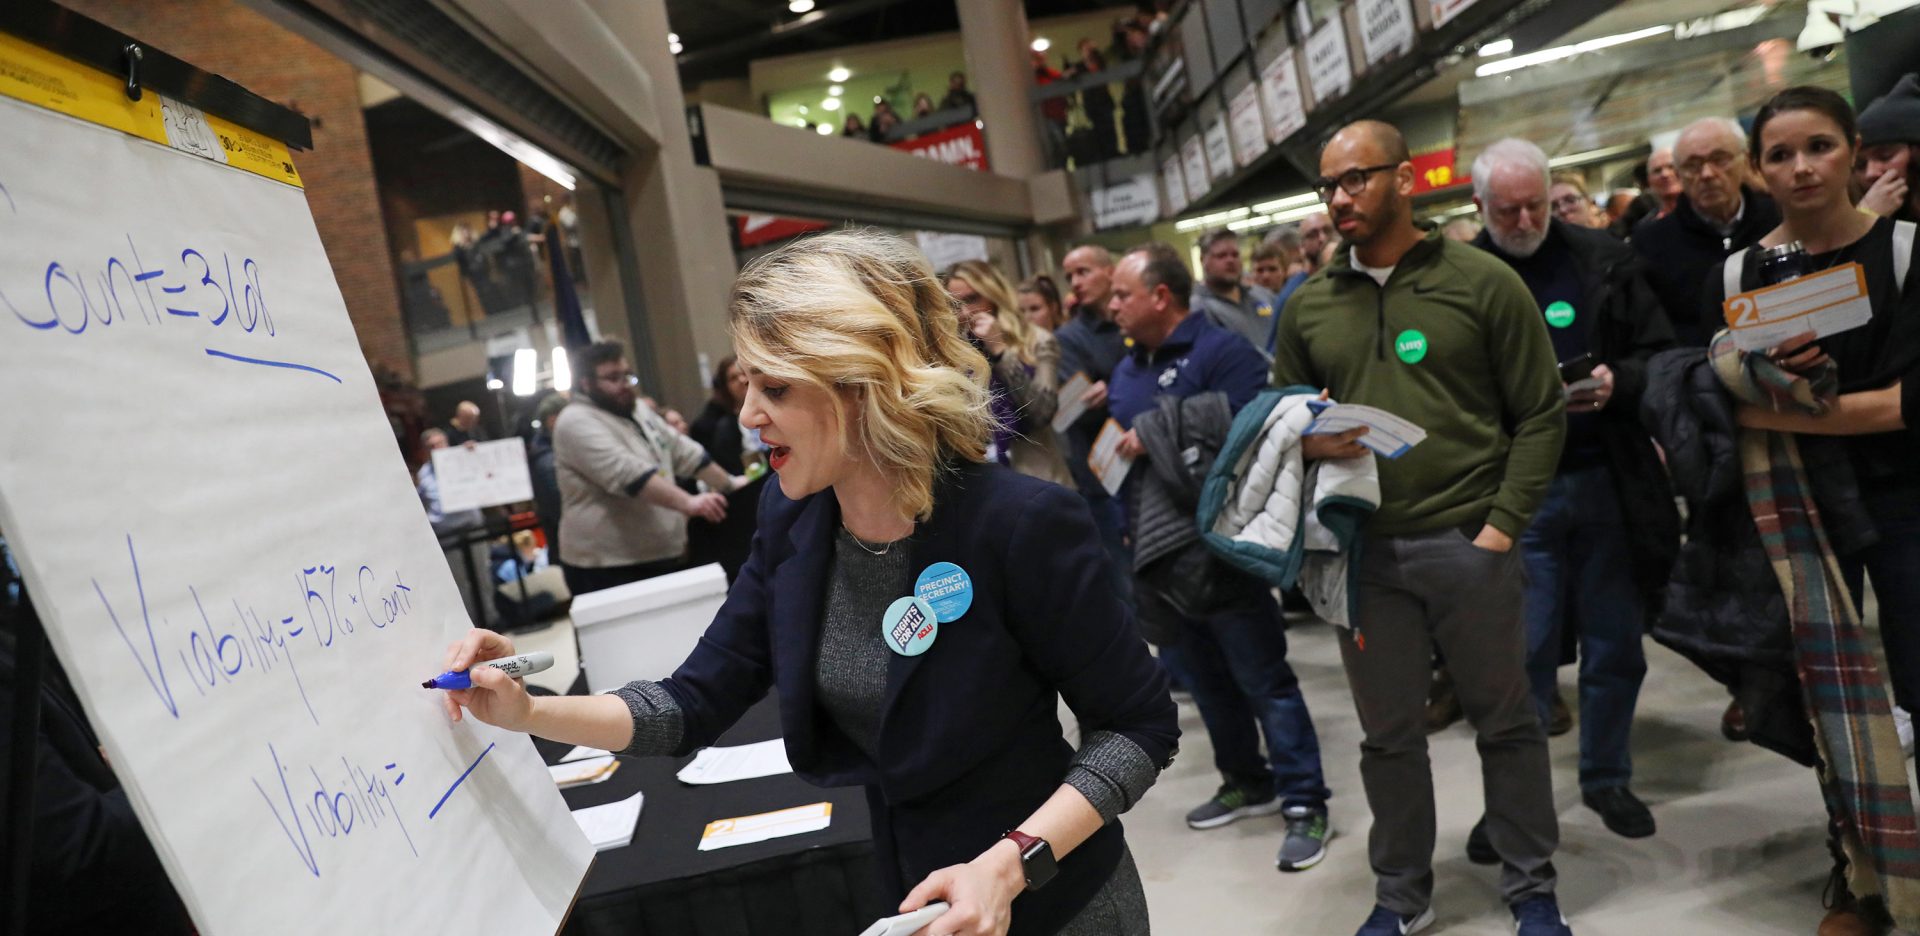 Precinct secretary Ari Fleisig writes in the number of people needed for a candidate to be viable at a caucus precinct site in Des Moines, Iowa on Monday night.